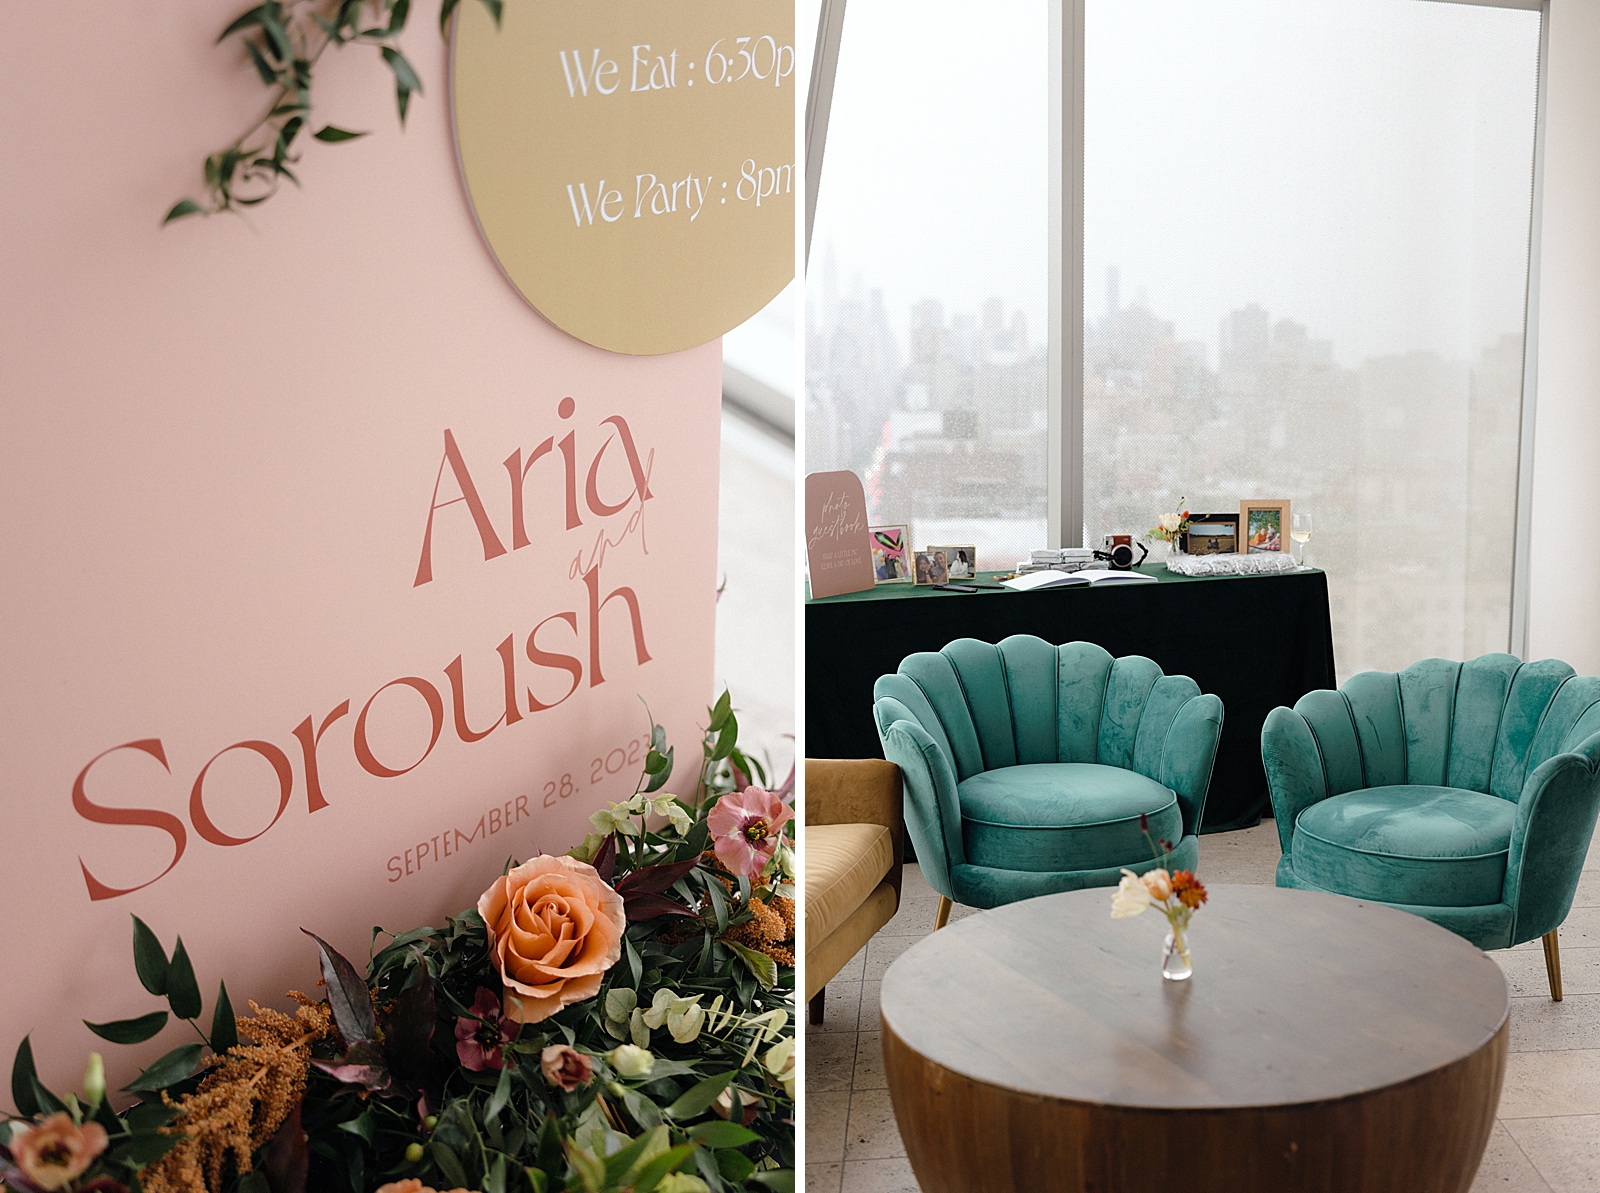 Left photo: Close up shot of a wedding sign saying the couple's names and the wedding date. 
Right photo: Shot of a lounge area with turquoise chairs and a mustard couch. 